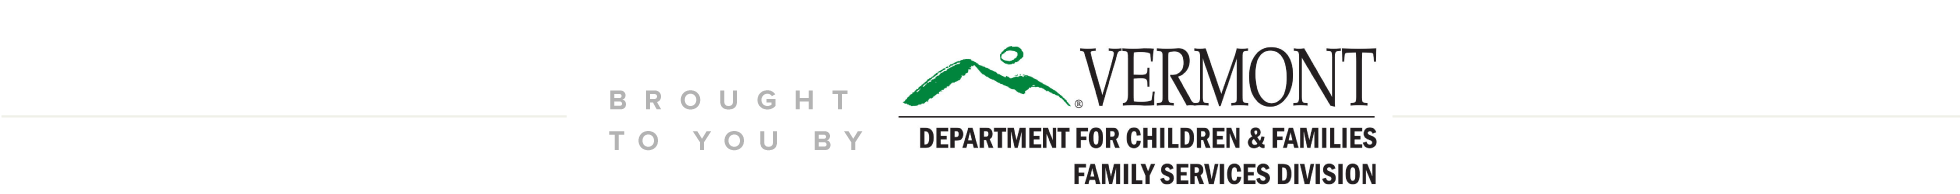 Vermont Department for Children and Families